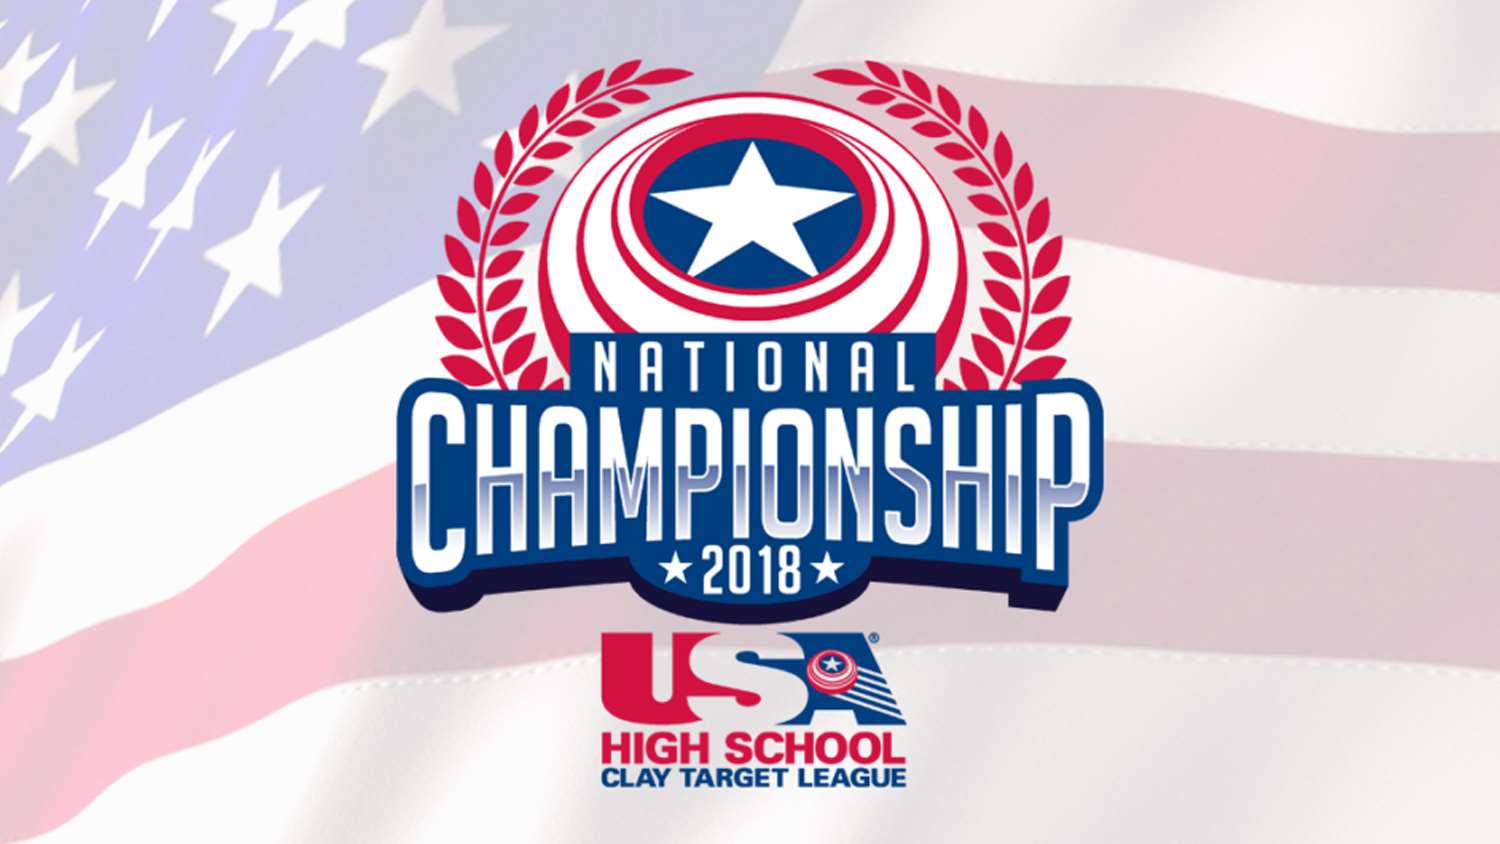 The inaugural USA High School Clay Target League National Championship was held in July 2018 in Michigan.